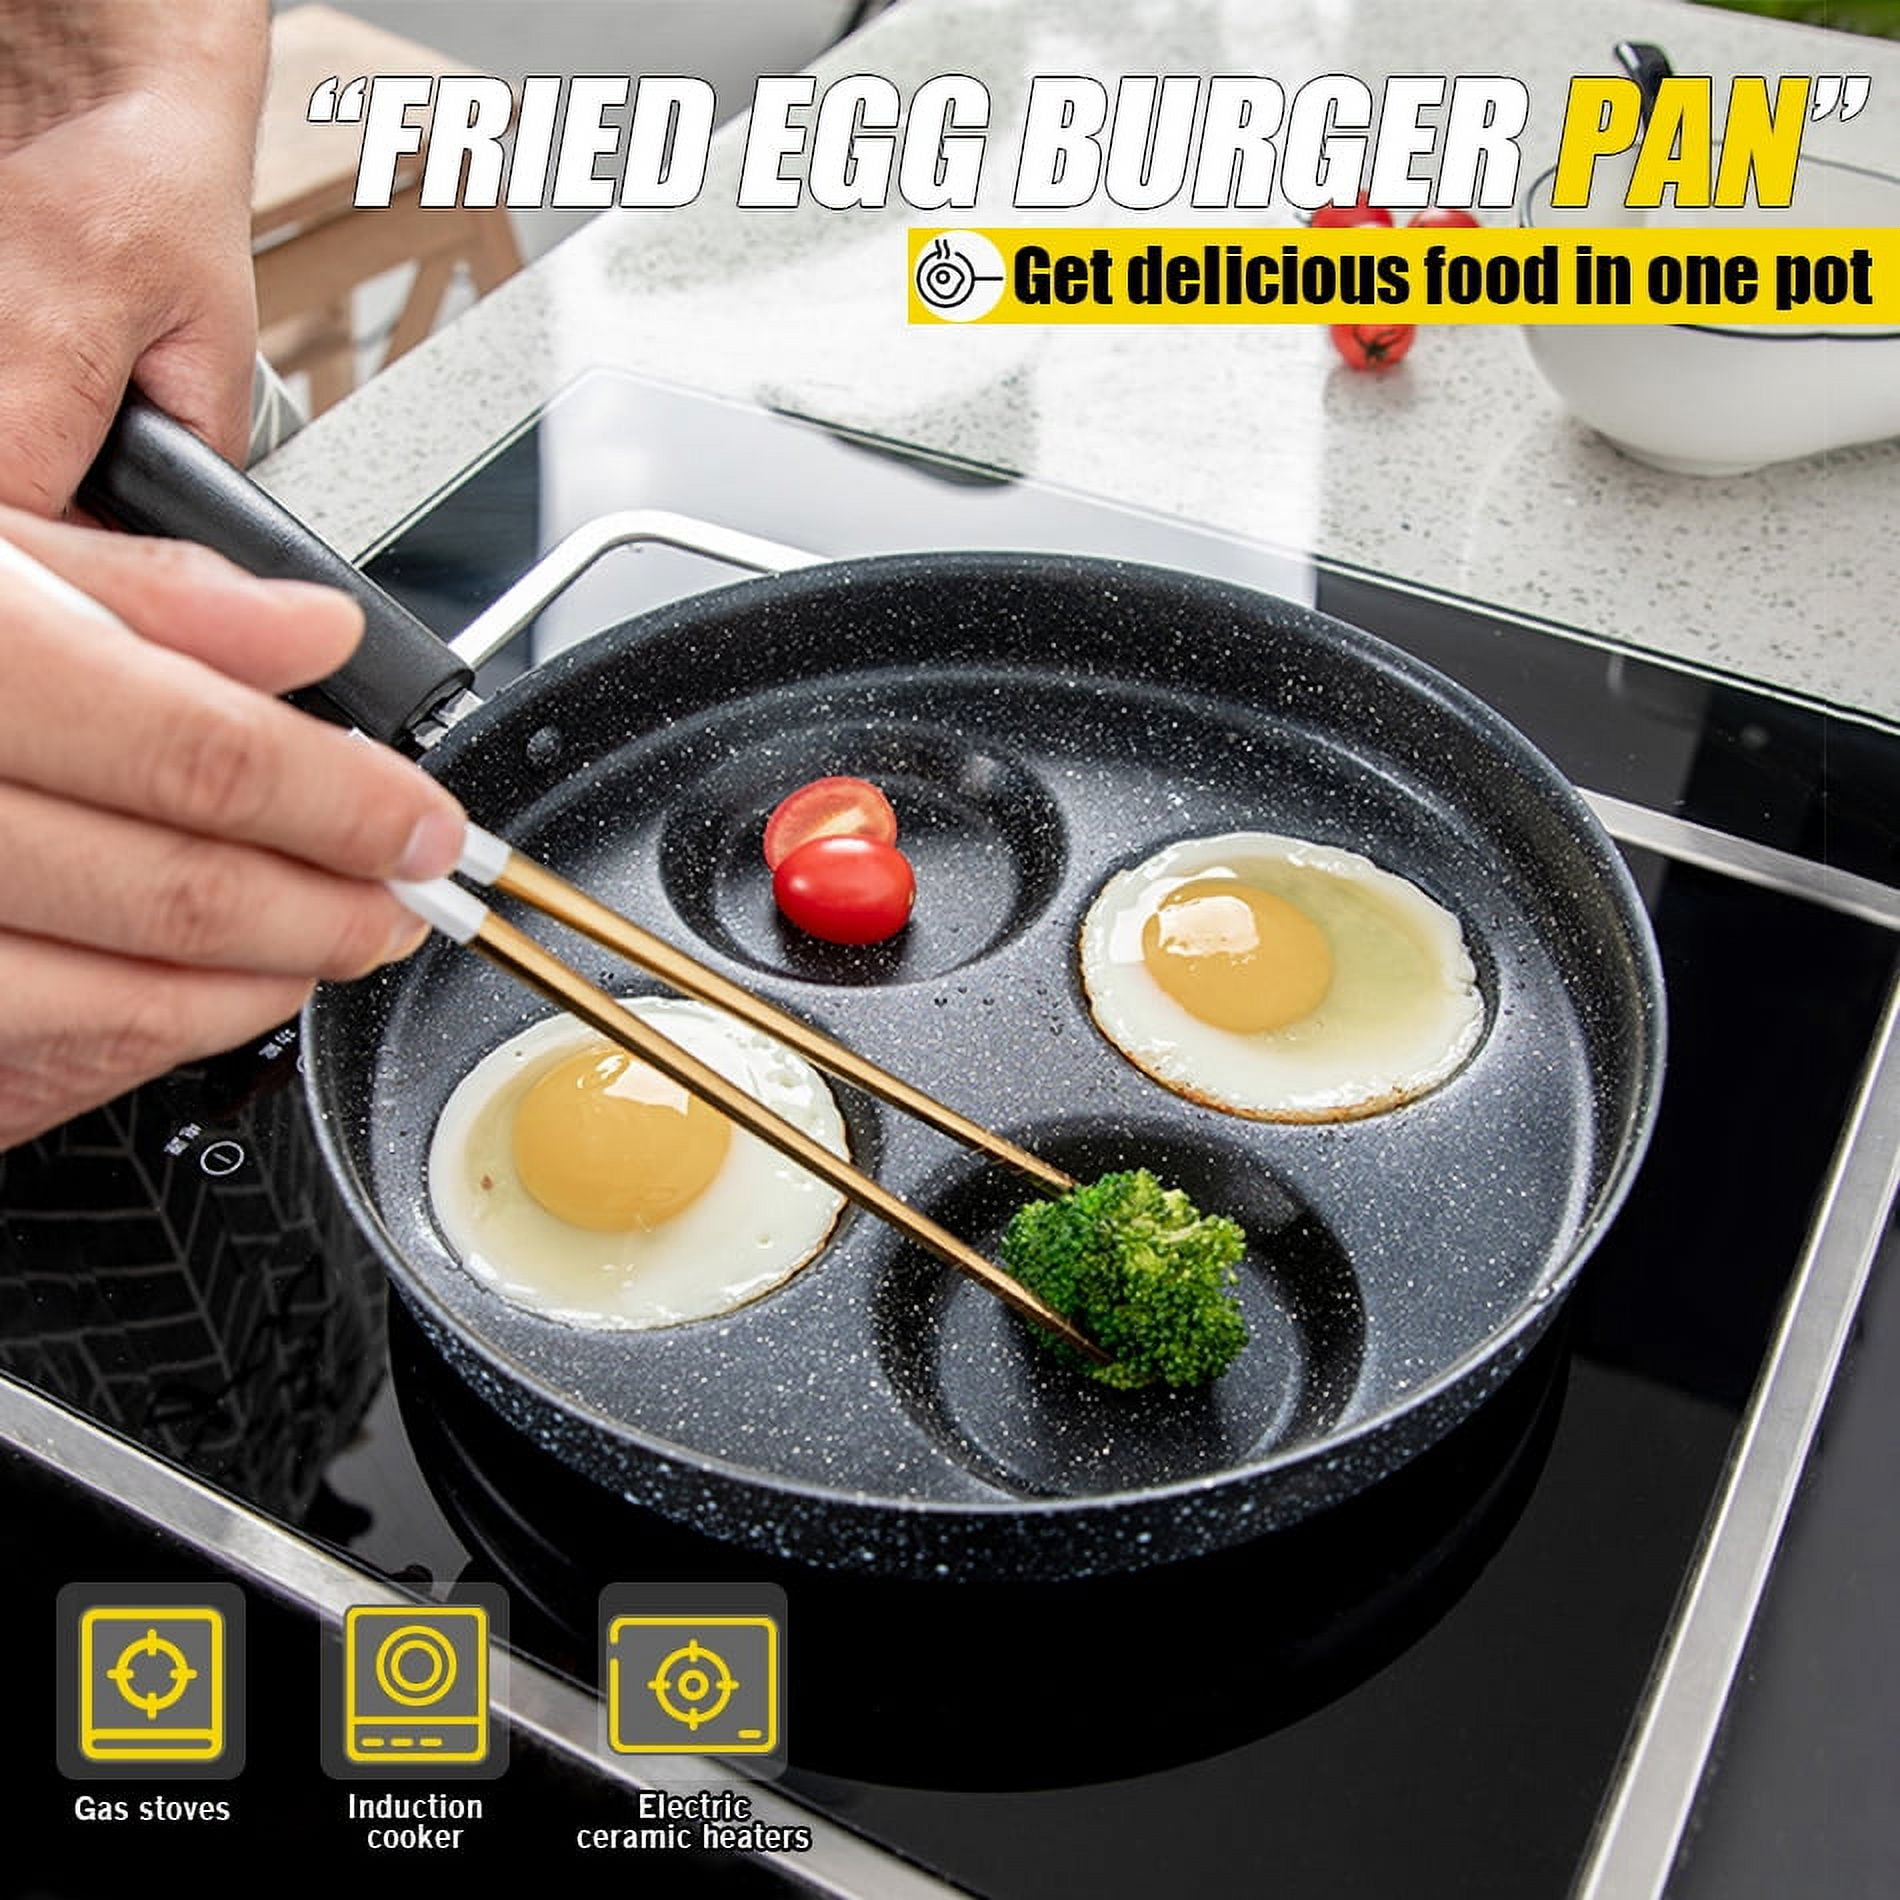 Egg Pan Frying 4 Maker Mini Pancakeburger Fried Ceramic Cooker Small  Divided Pans Stick Non Cup Nonstick